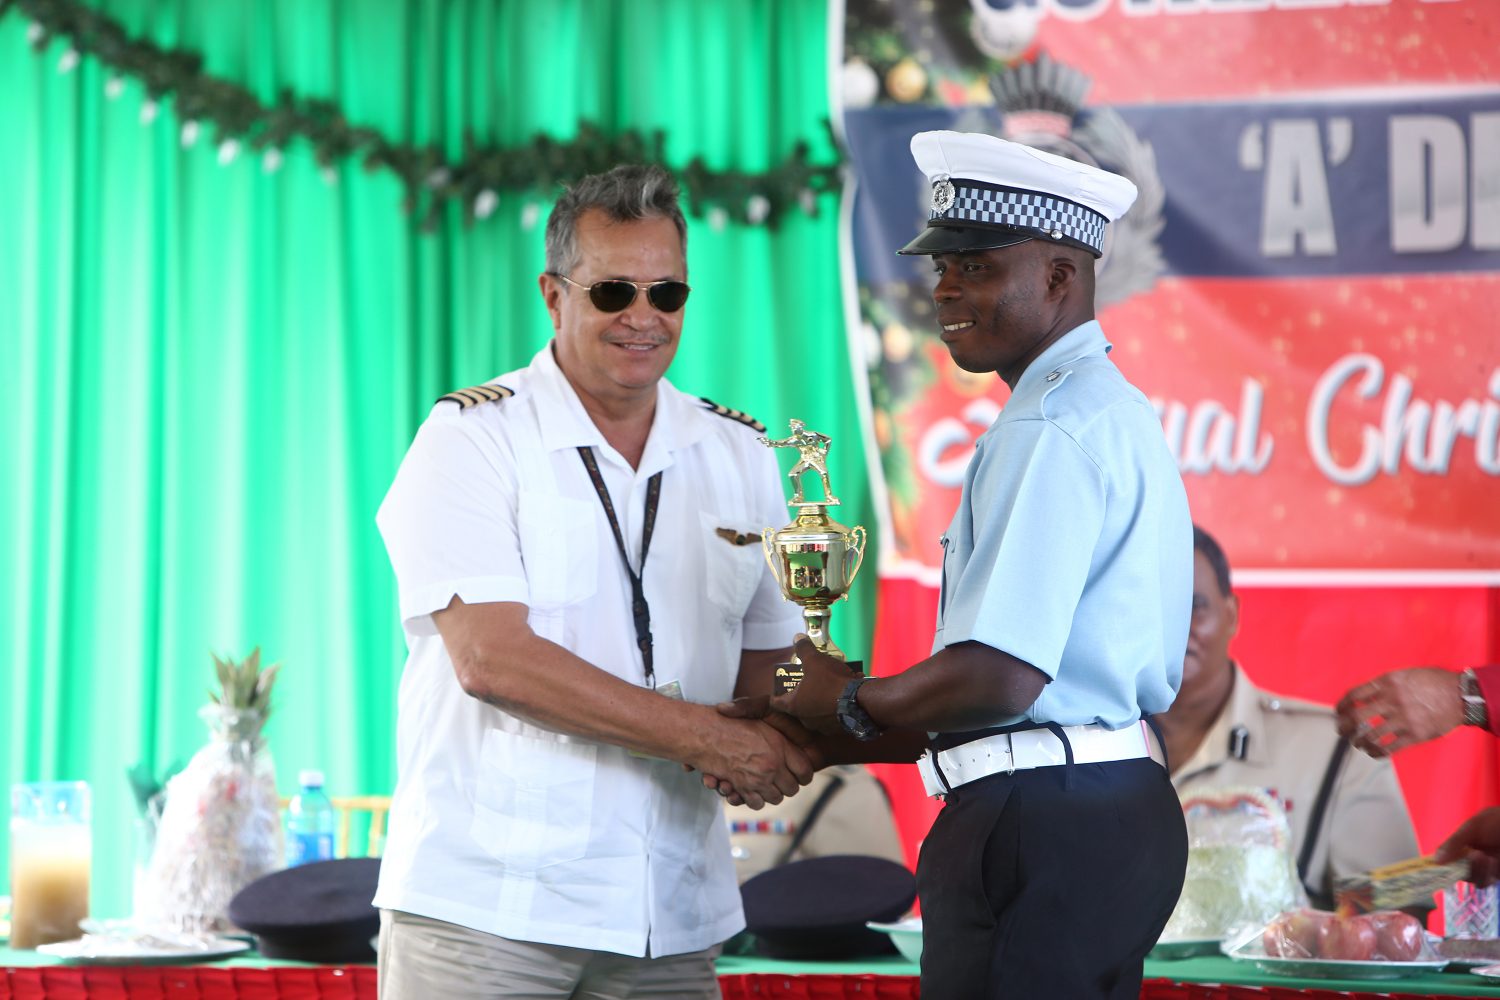 Sergeant 19499 Garvin Boyce (right) who was awarded ‘A’ Division Best Cop, collecting a trophy from Chief Executive Officer (CEO) of Roraima Airways Captain Gerry Gouveia.
